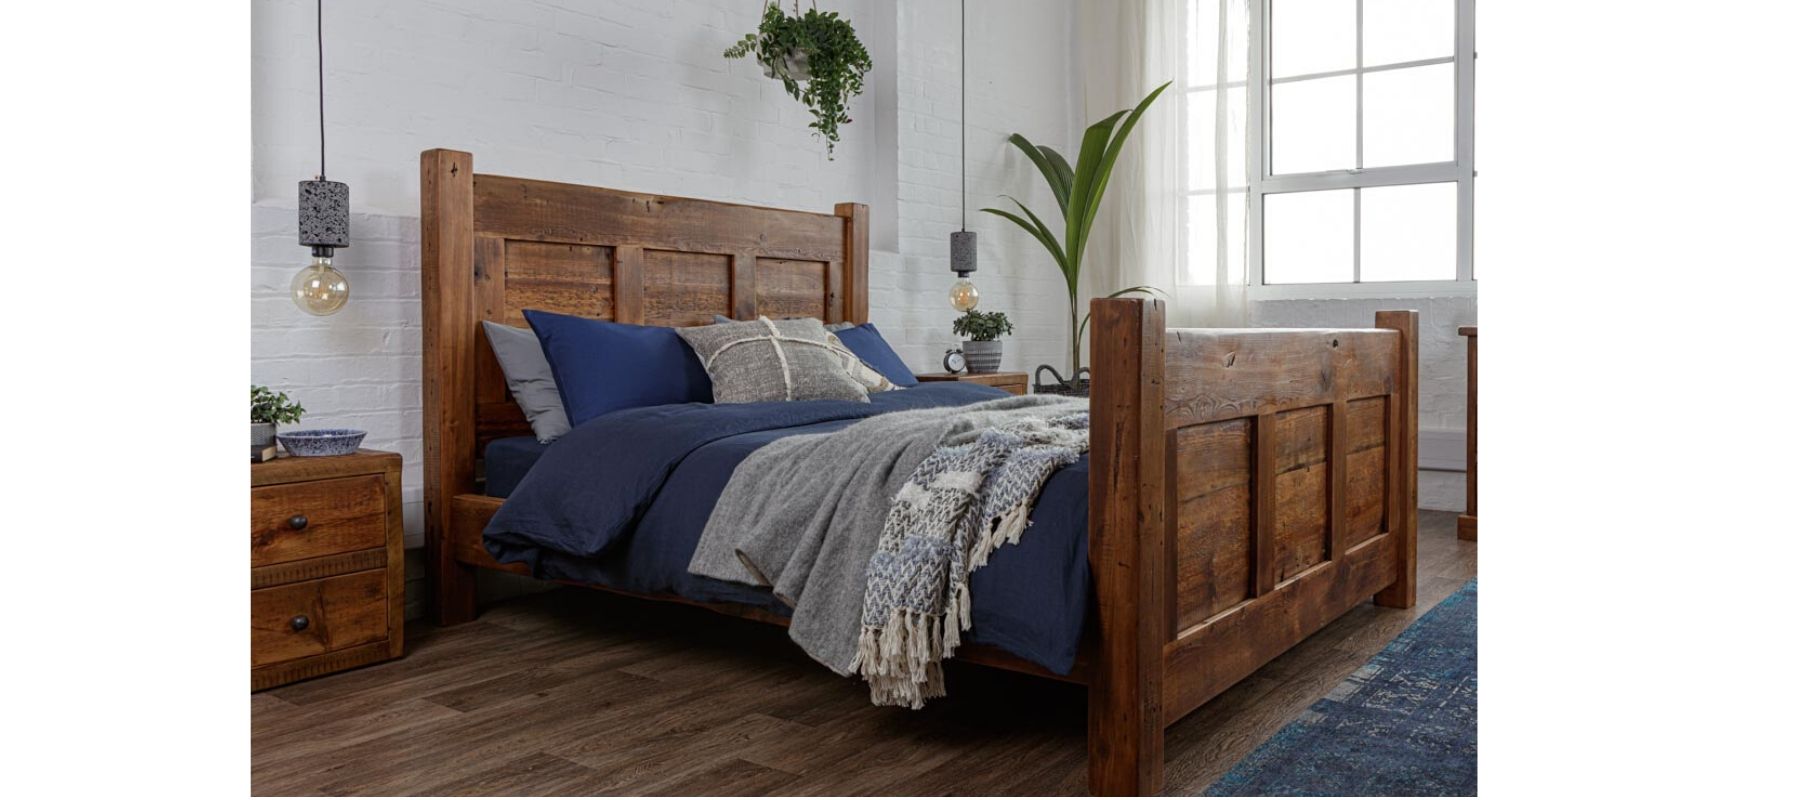 Reclaimed wood bed against white brick wall